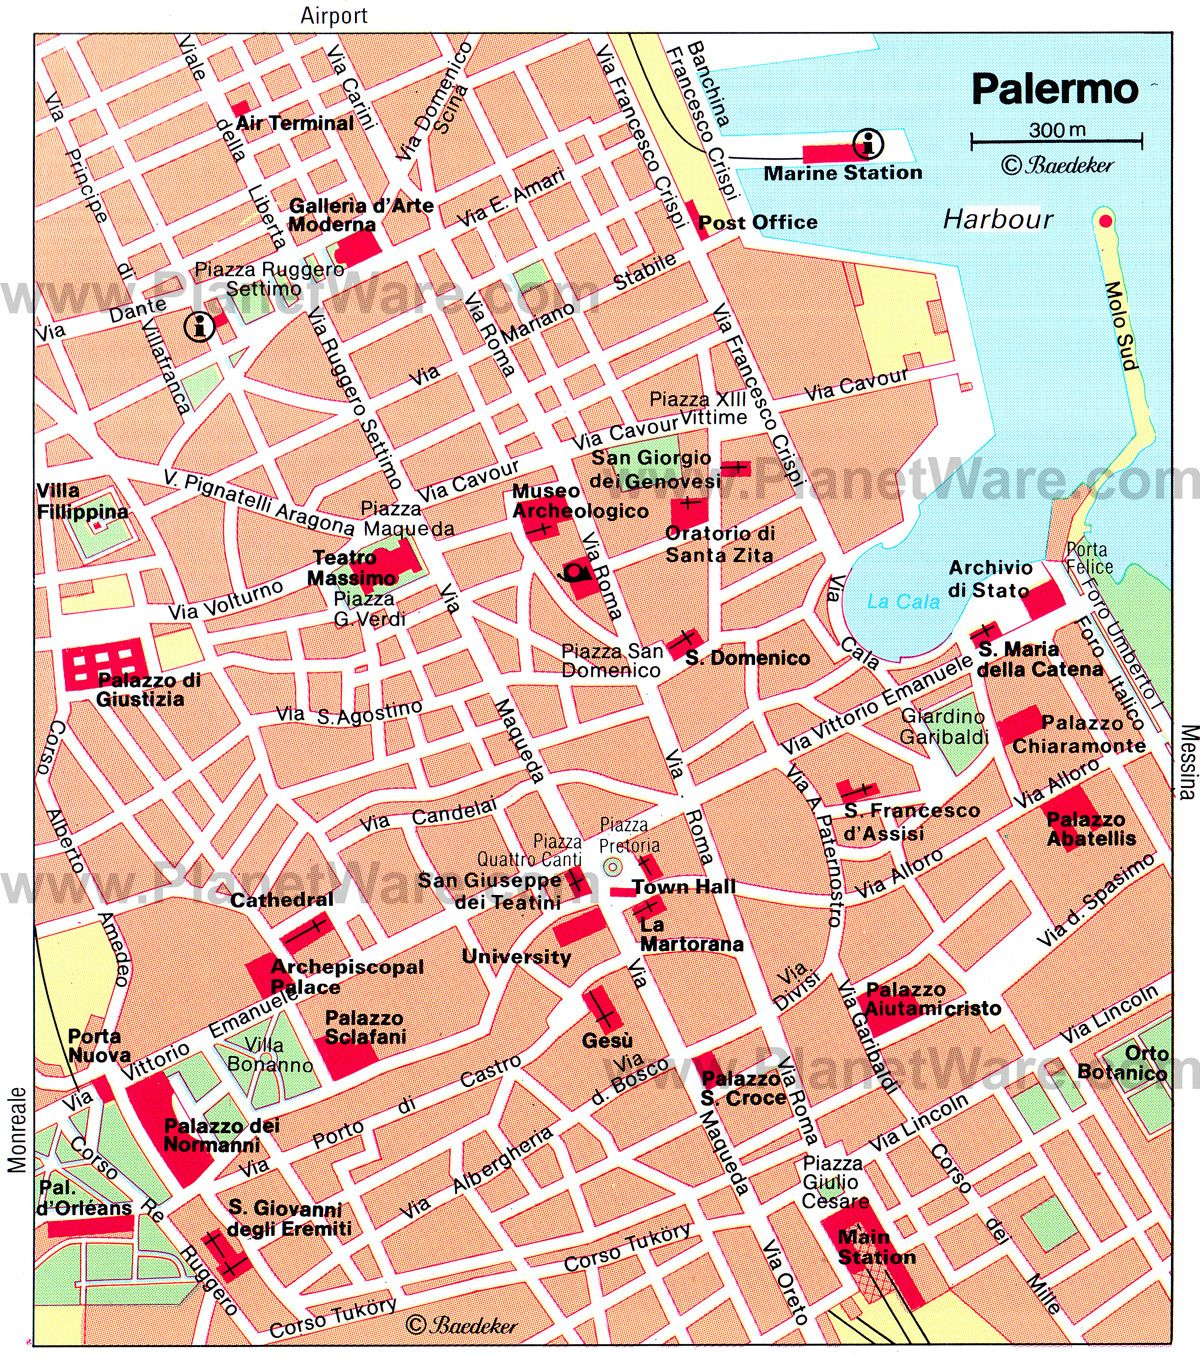 Palermo City Center Map Tourist Attractions Palermo 